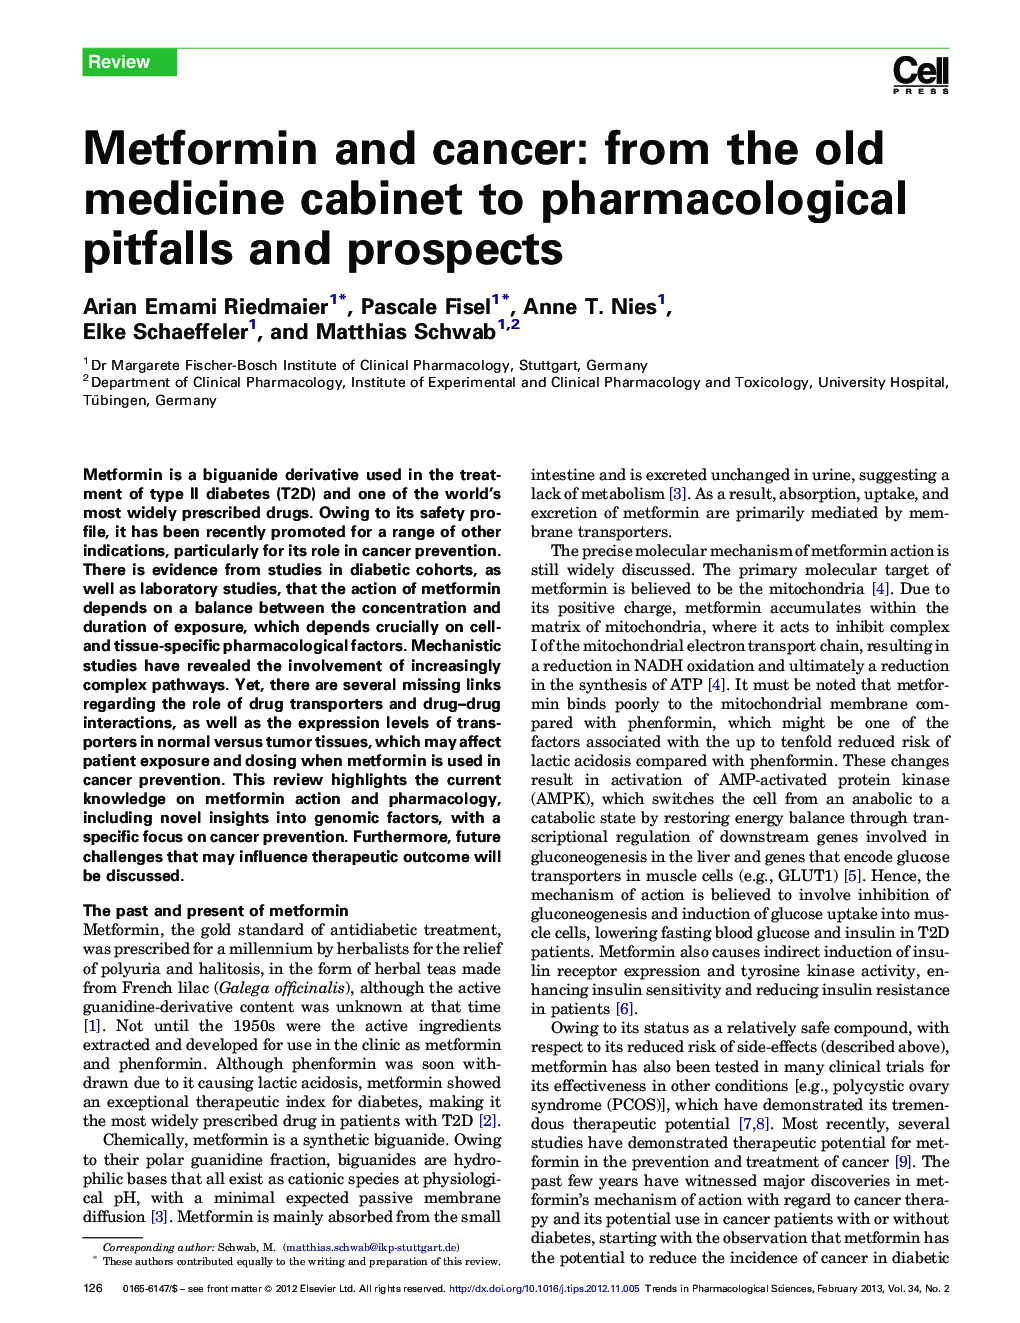 Metformin and cancer: from the old medicine cabinet to pharmacological pitfalls and prospects